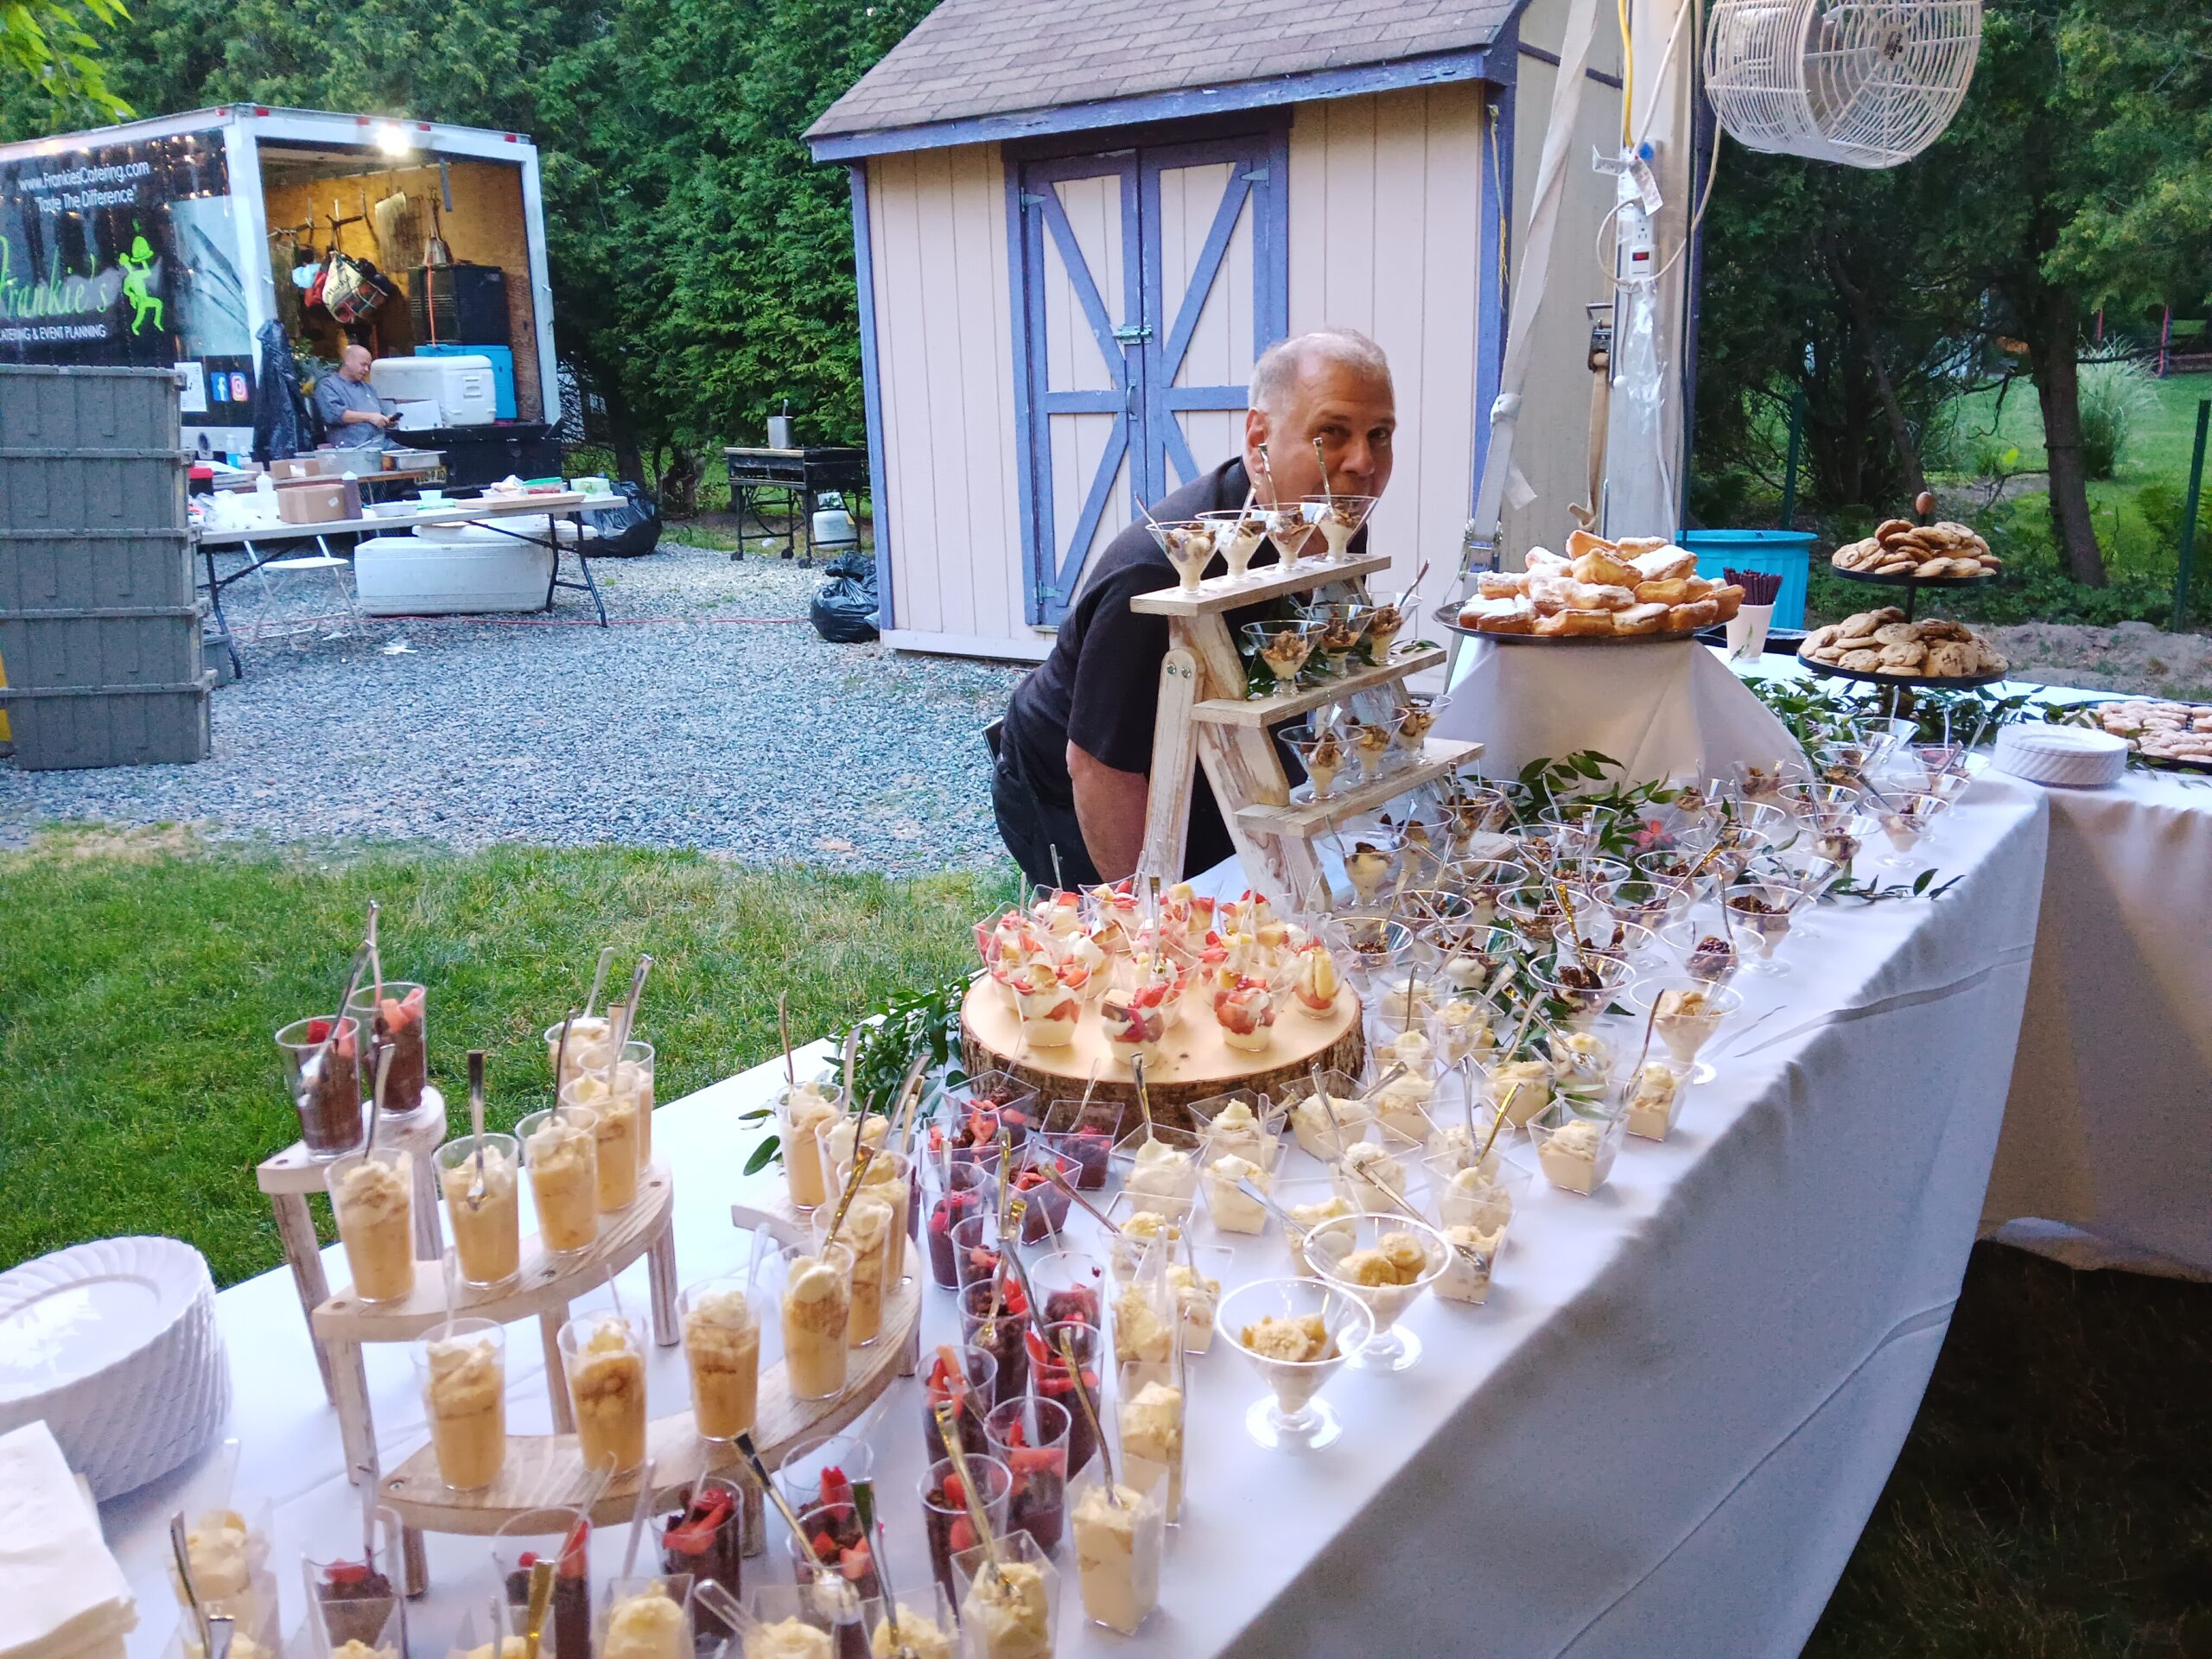 A person standing at a table with many different desserts.